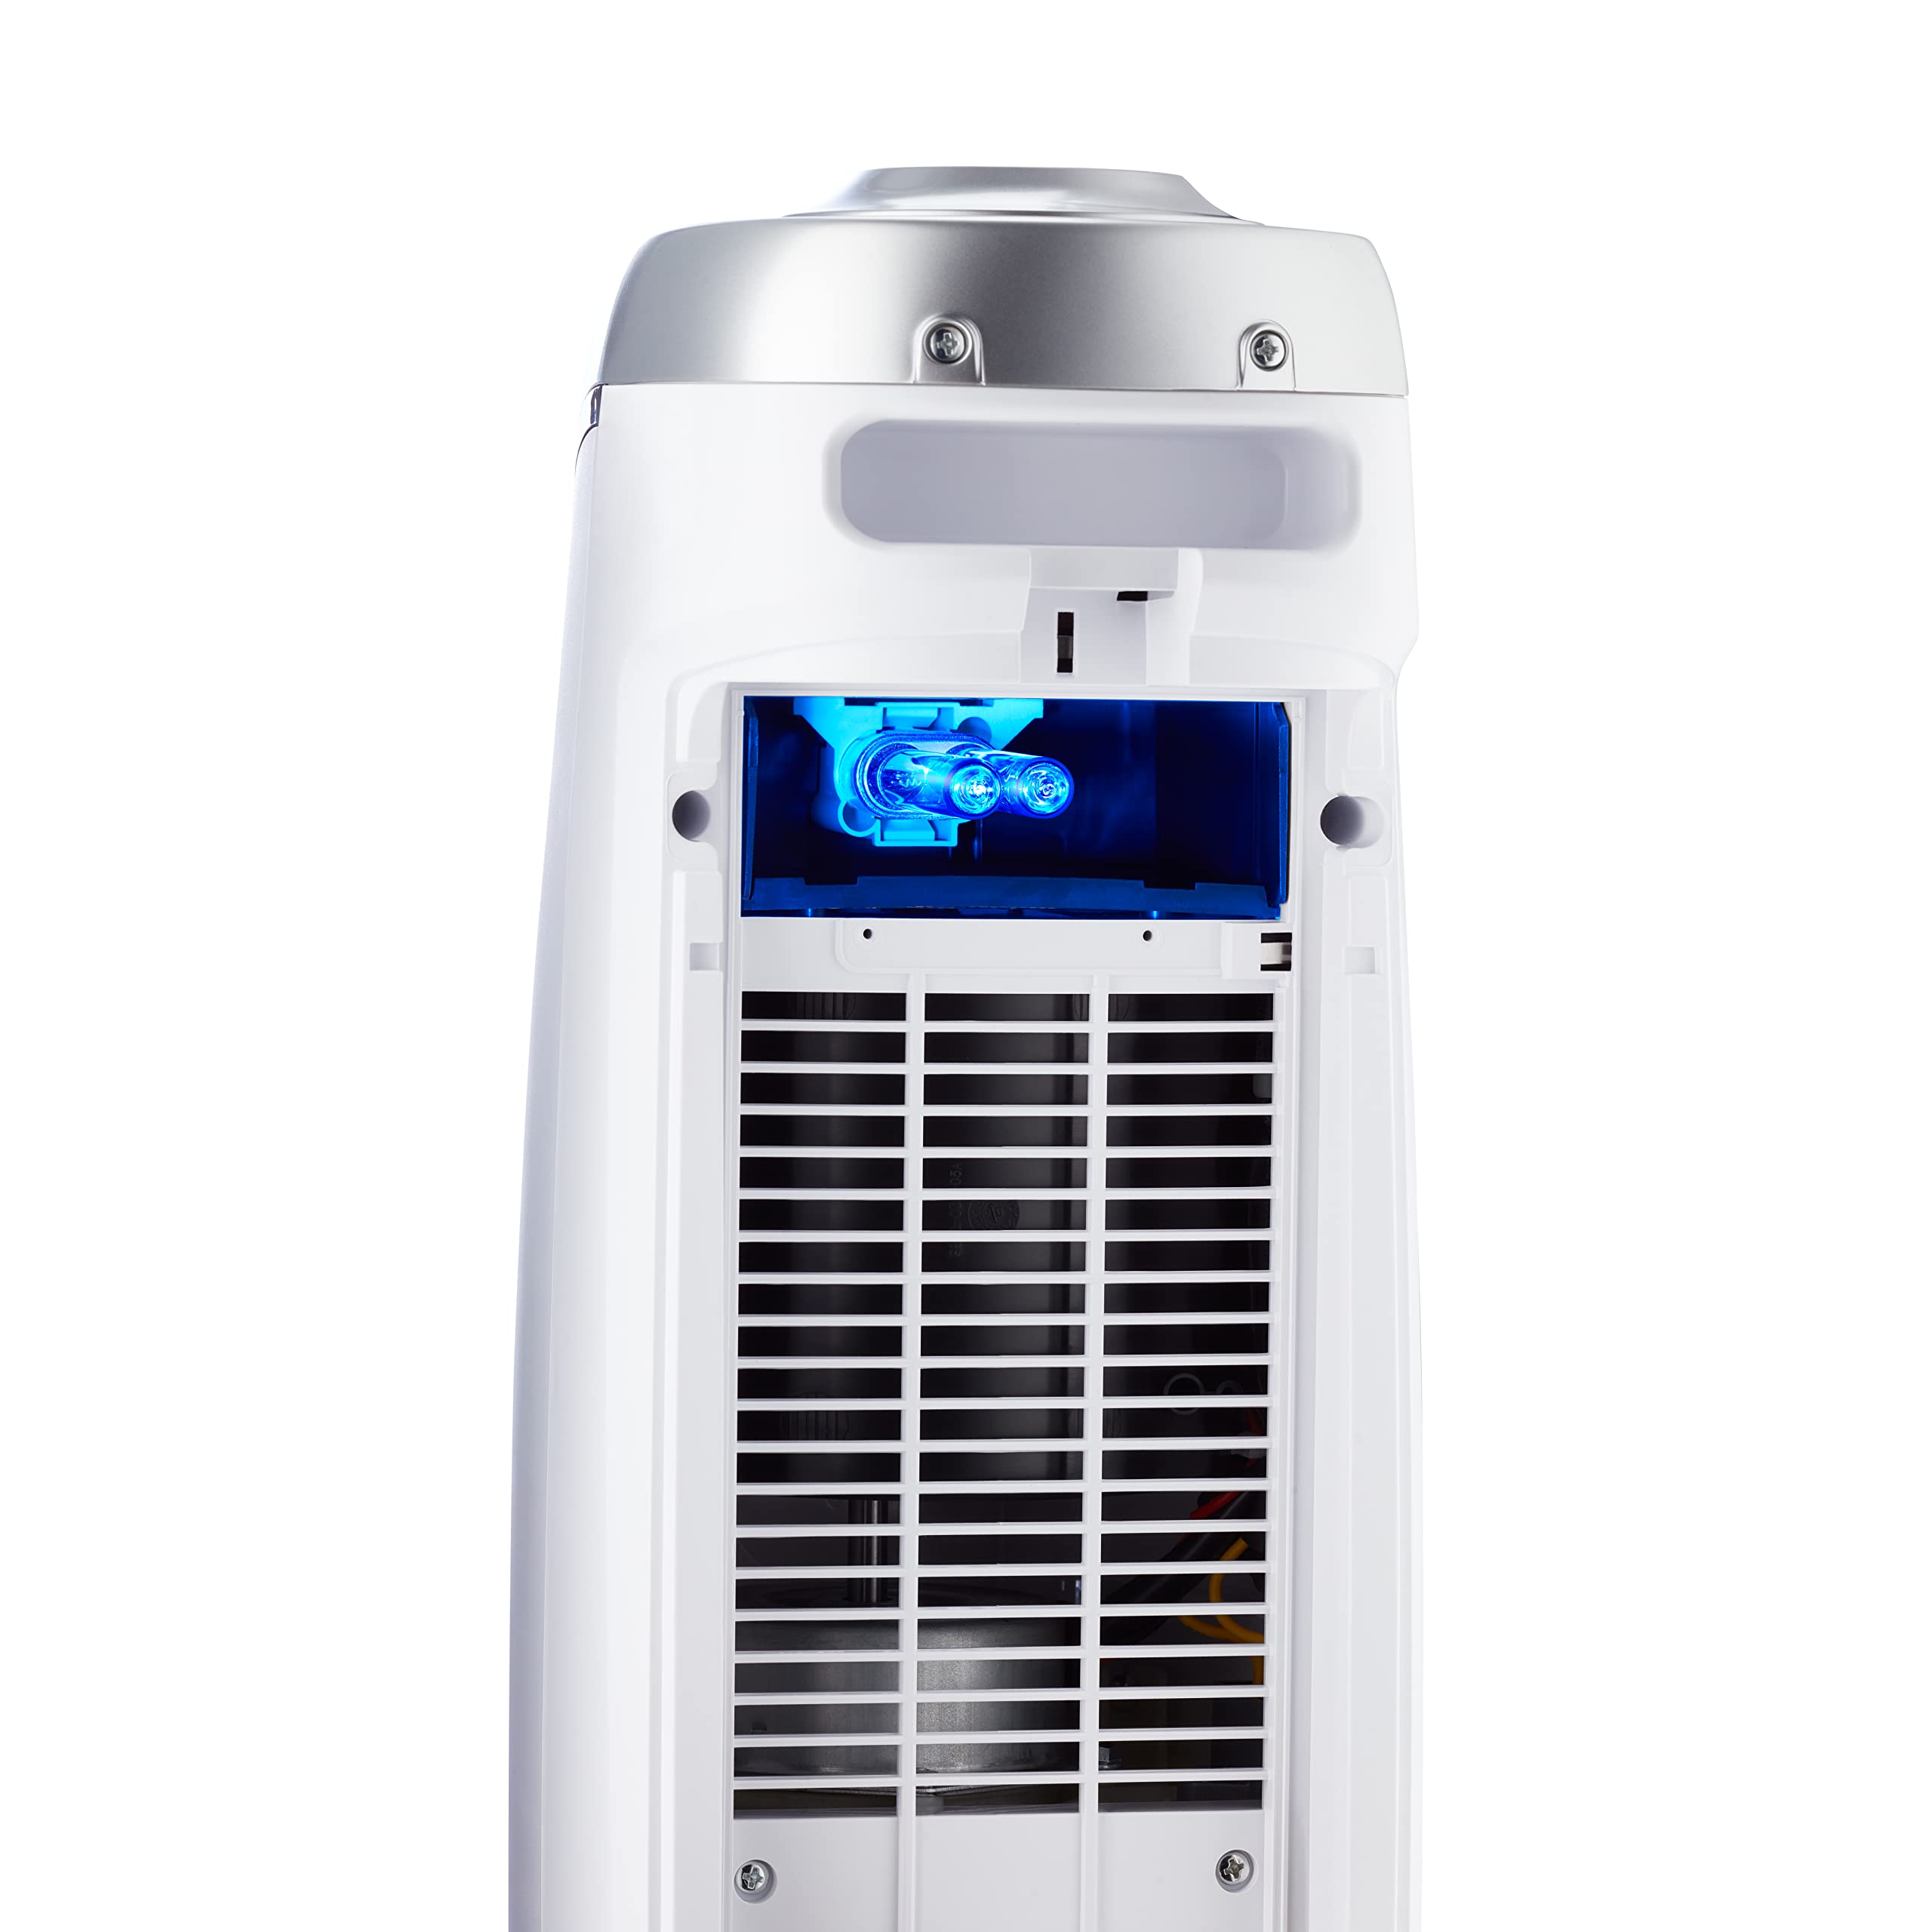 Germ Guardian Air Purifier with HEPA 13 Filter,Removes 99.97% of Pollutants,Covers Large Room up to 743 Sq. Foot Room in 1 Hr,UV-C Light Helps Reduce Germs,Zero Ozone Verified,22”,White,AC4825W